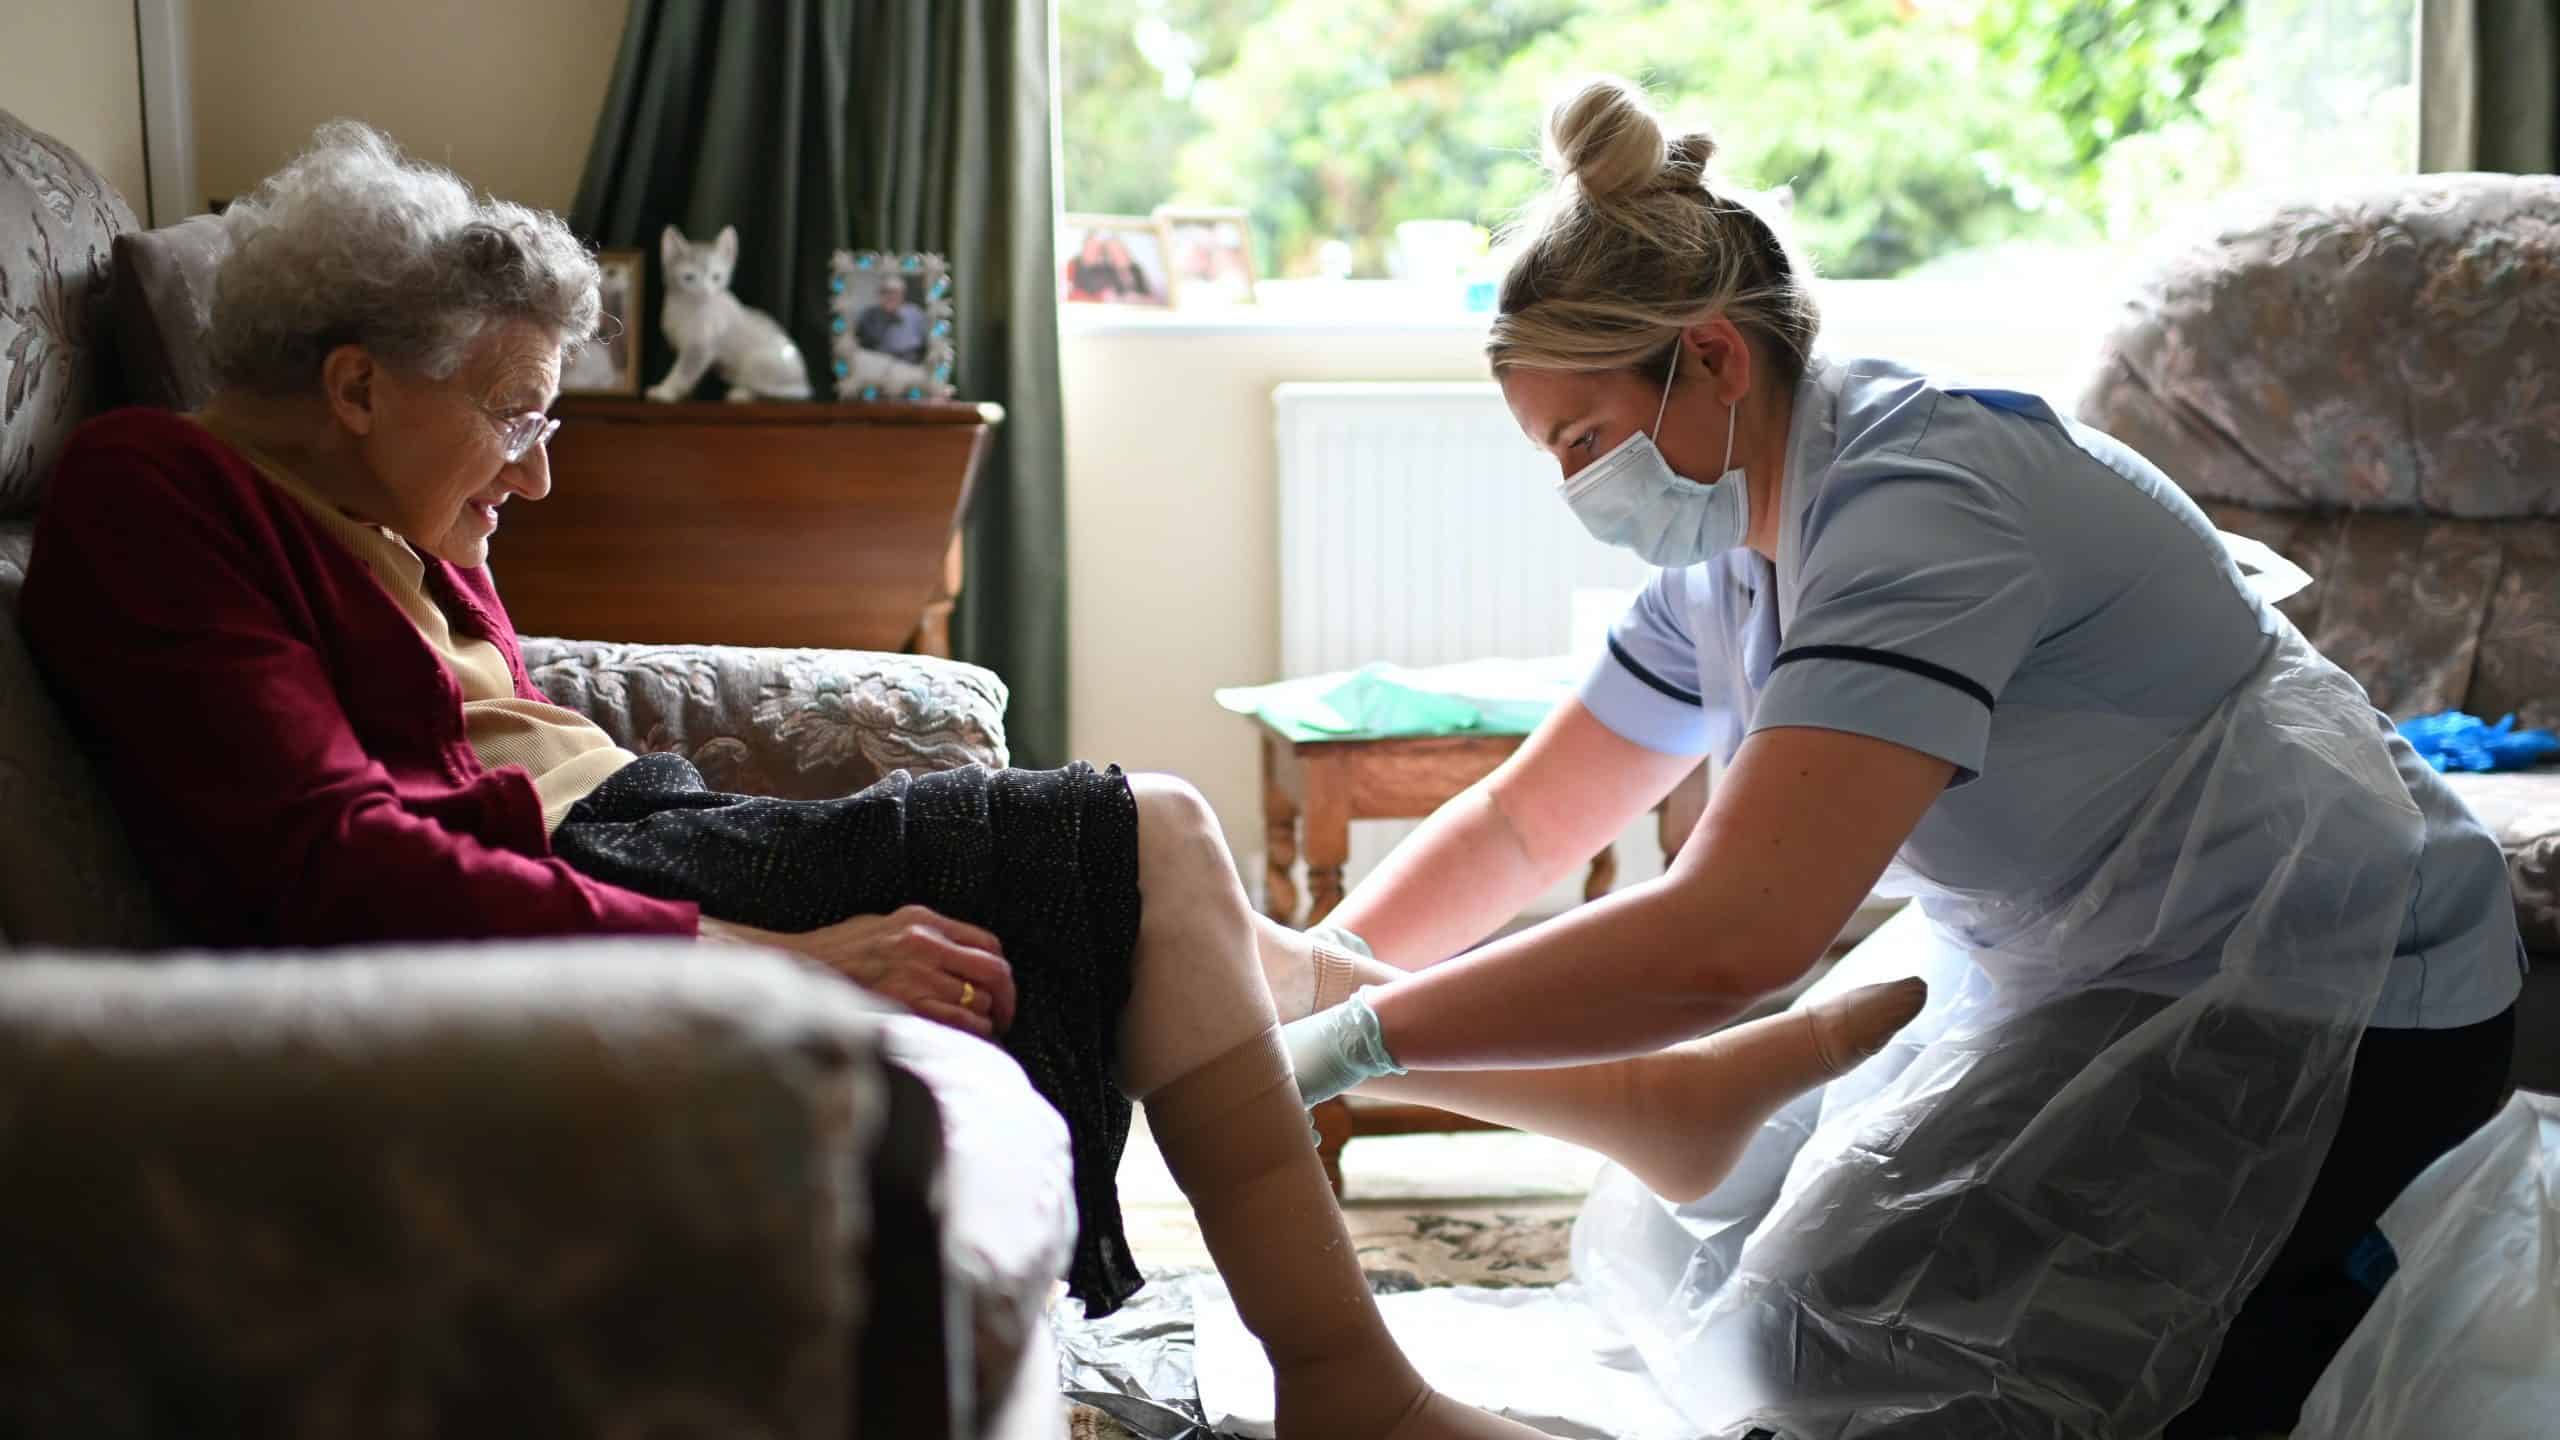 Public sector pay rise announcement ‘kick in the teeth for social care staff’